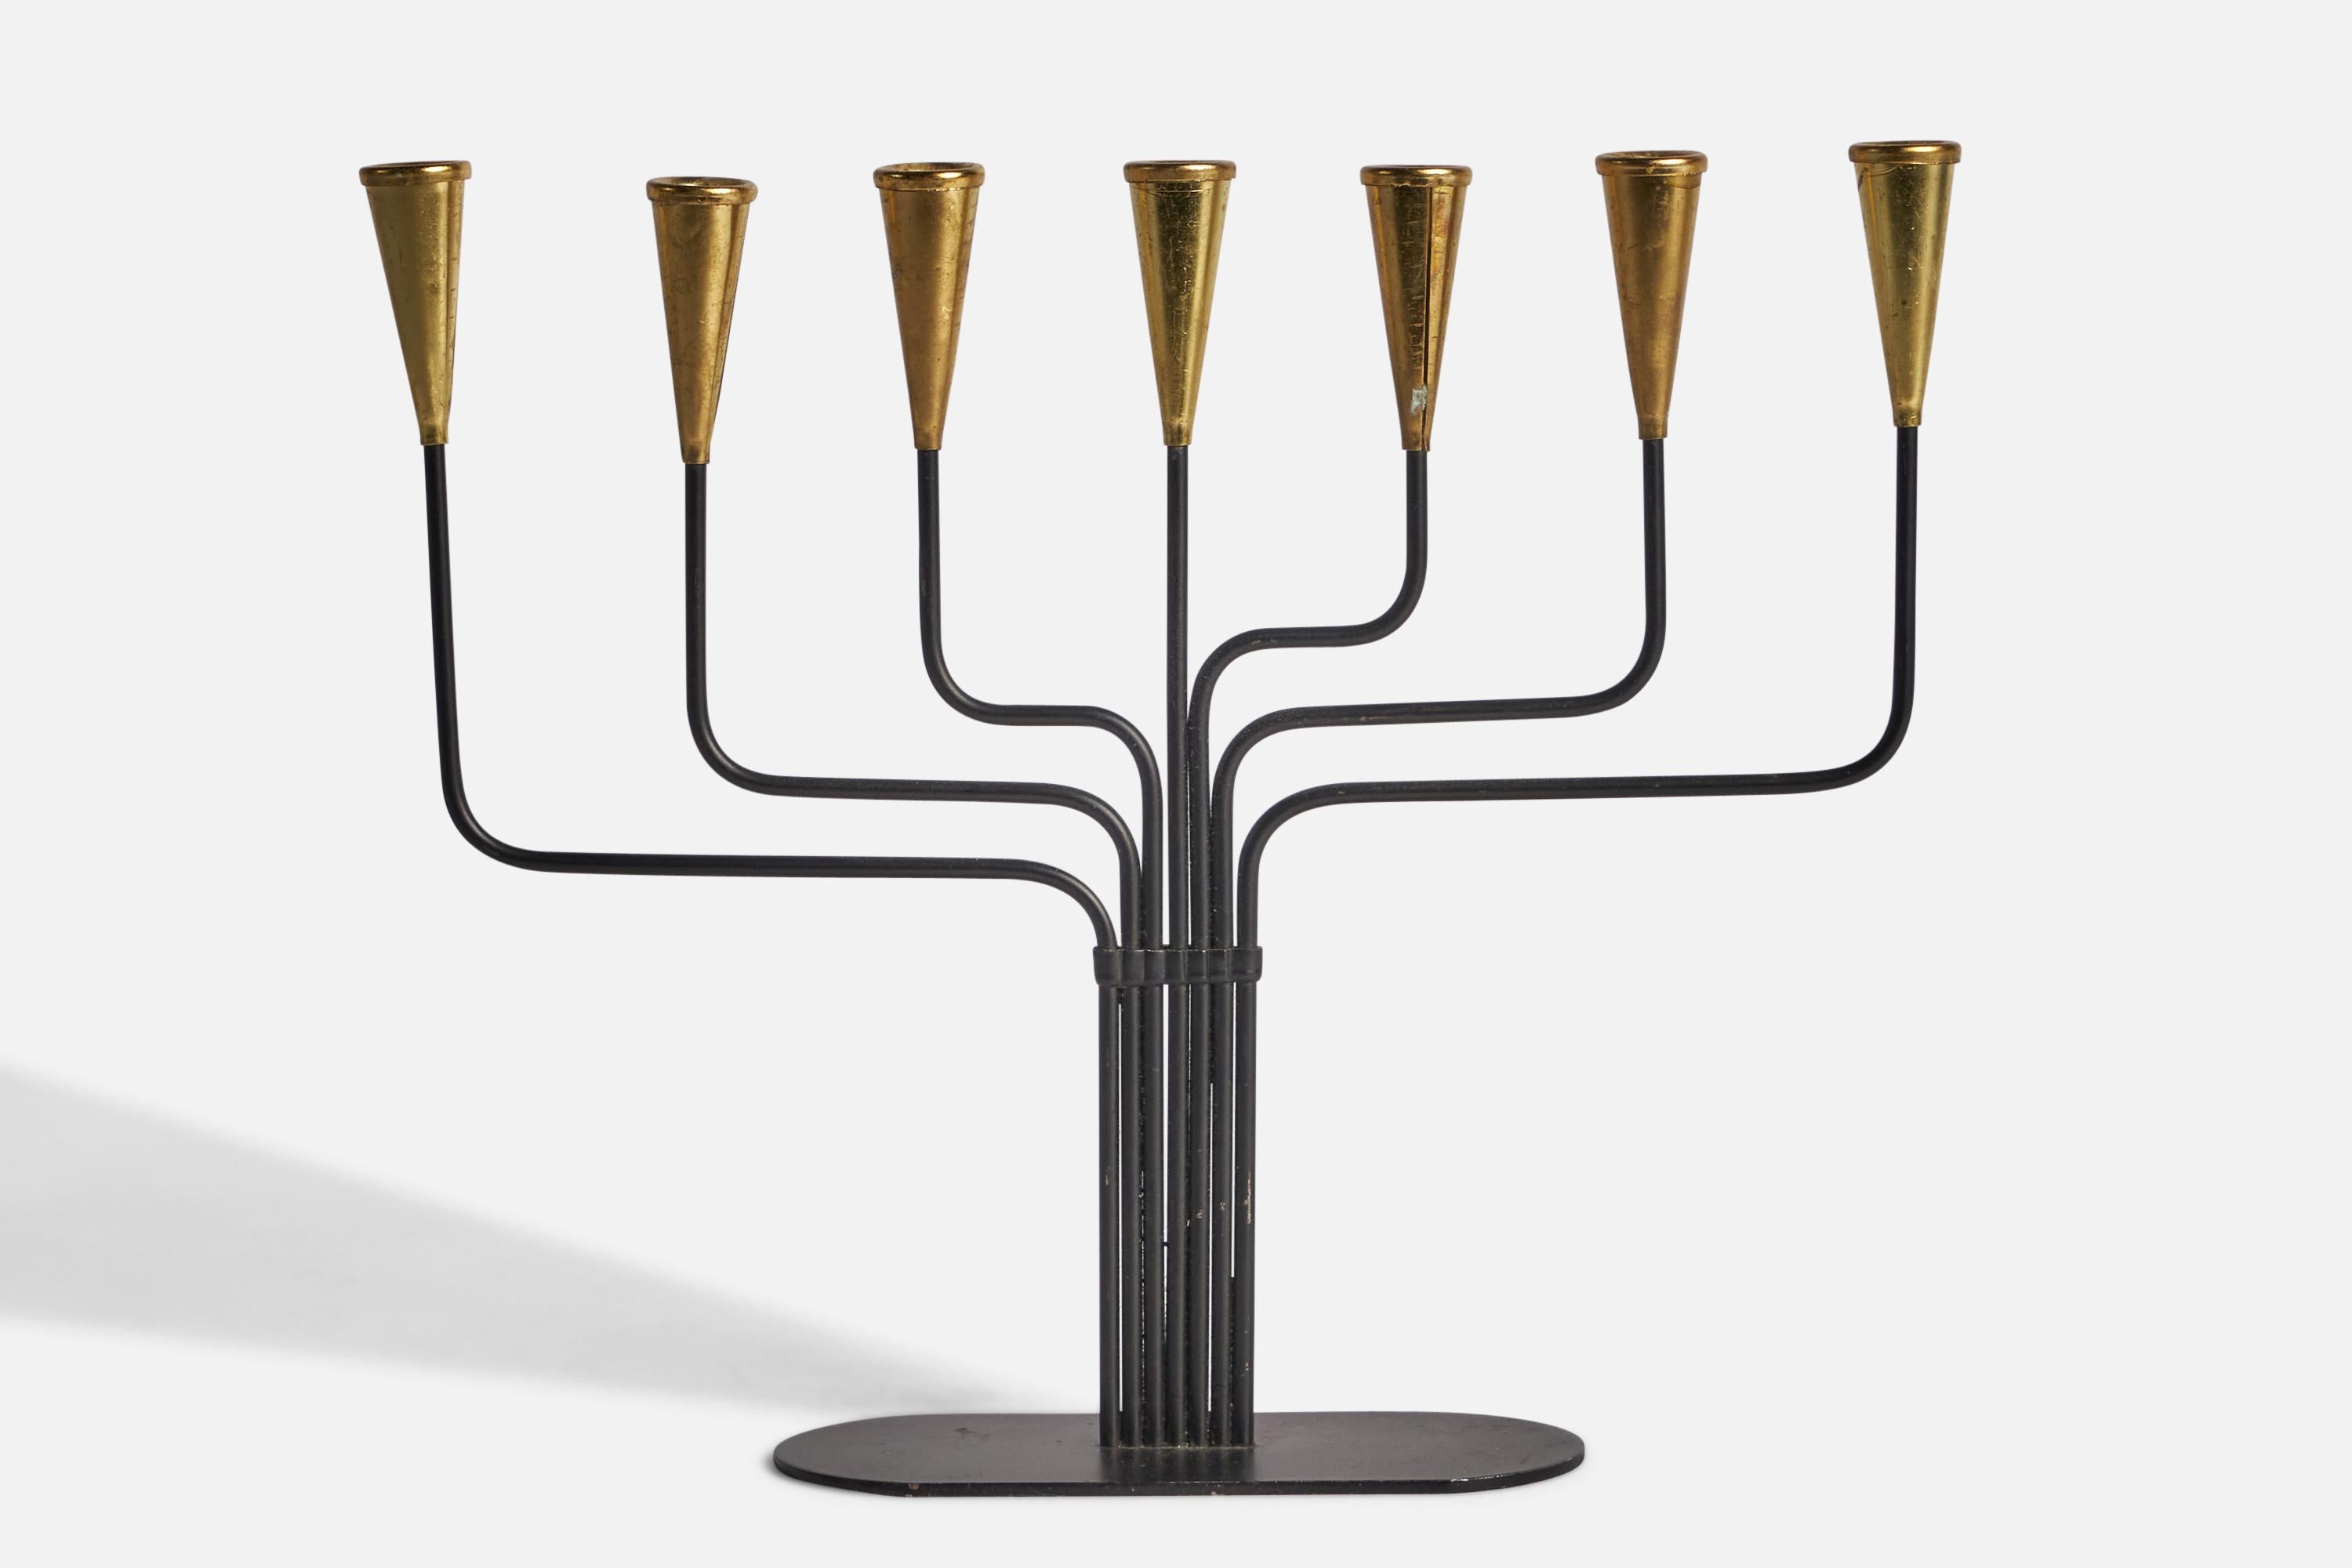 A brass and metal candelabra designed by Gunnar Ander and produced by Ystad-Metall, Sweden, c. 1950s.

Hold 0.35” diameter candle